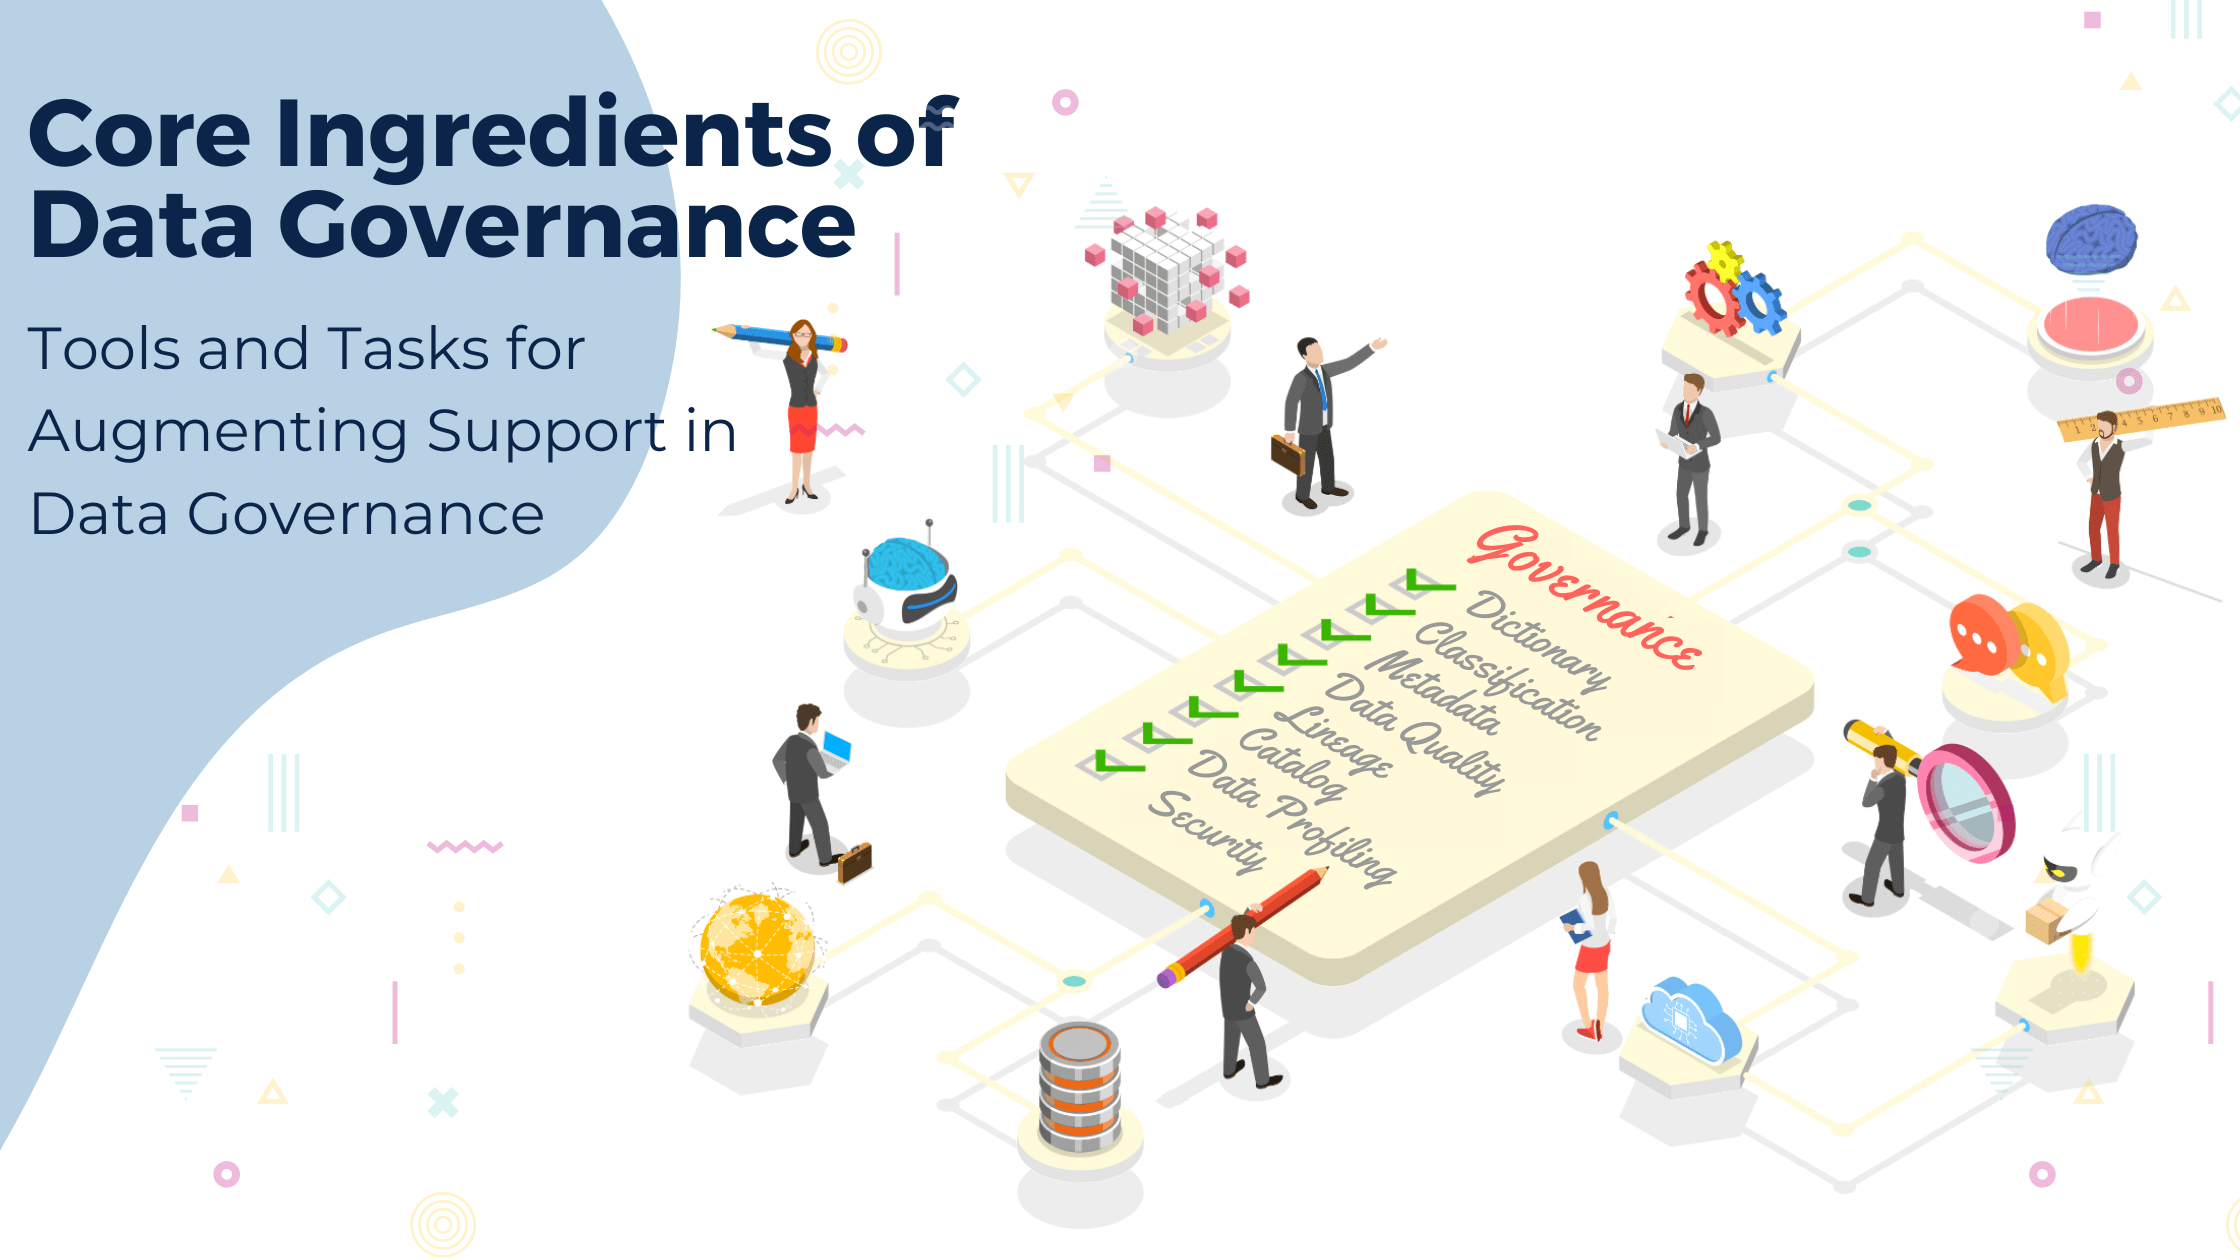 Core Ingredients of Data Governance